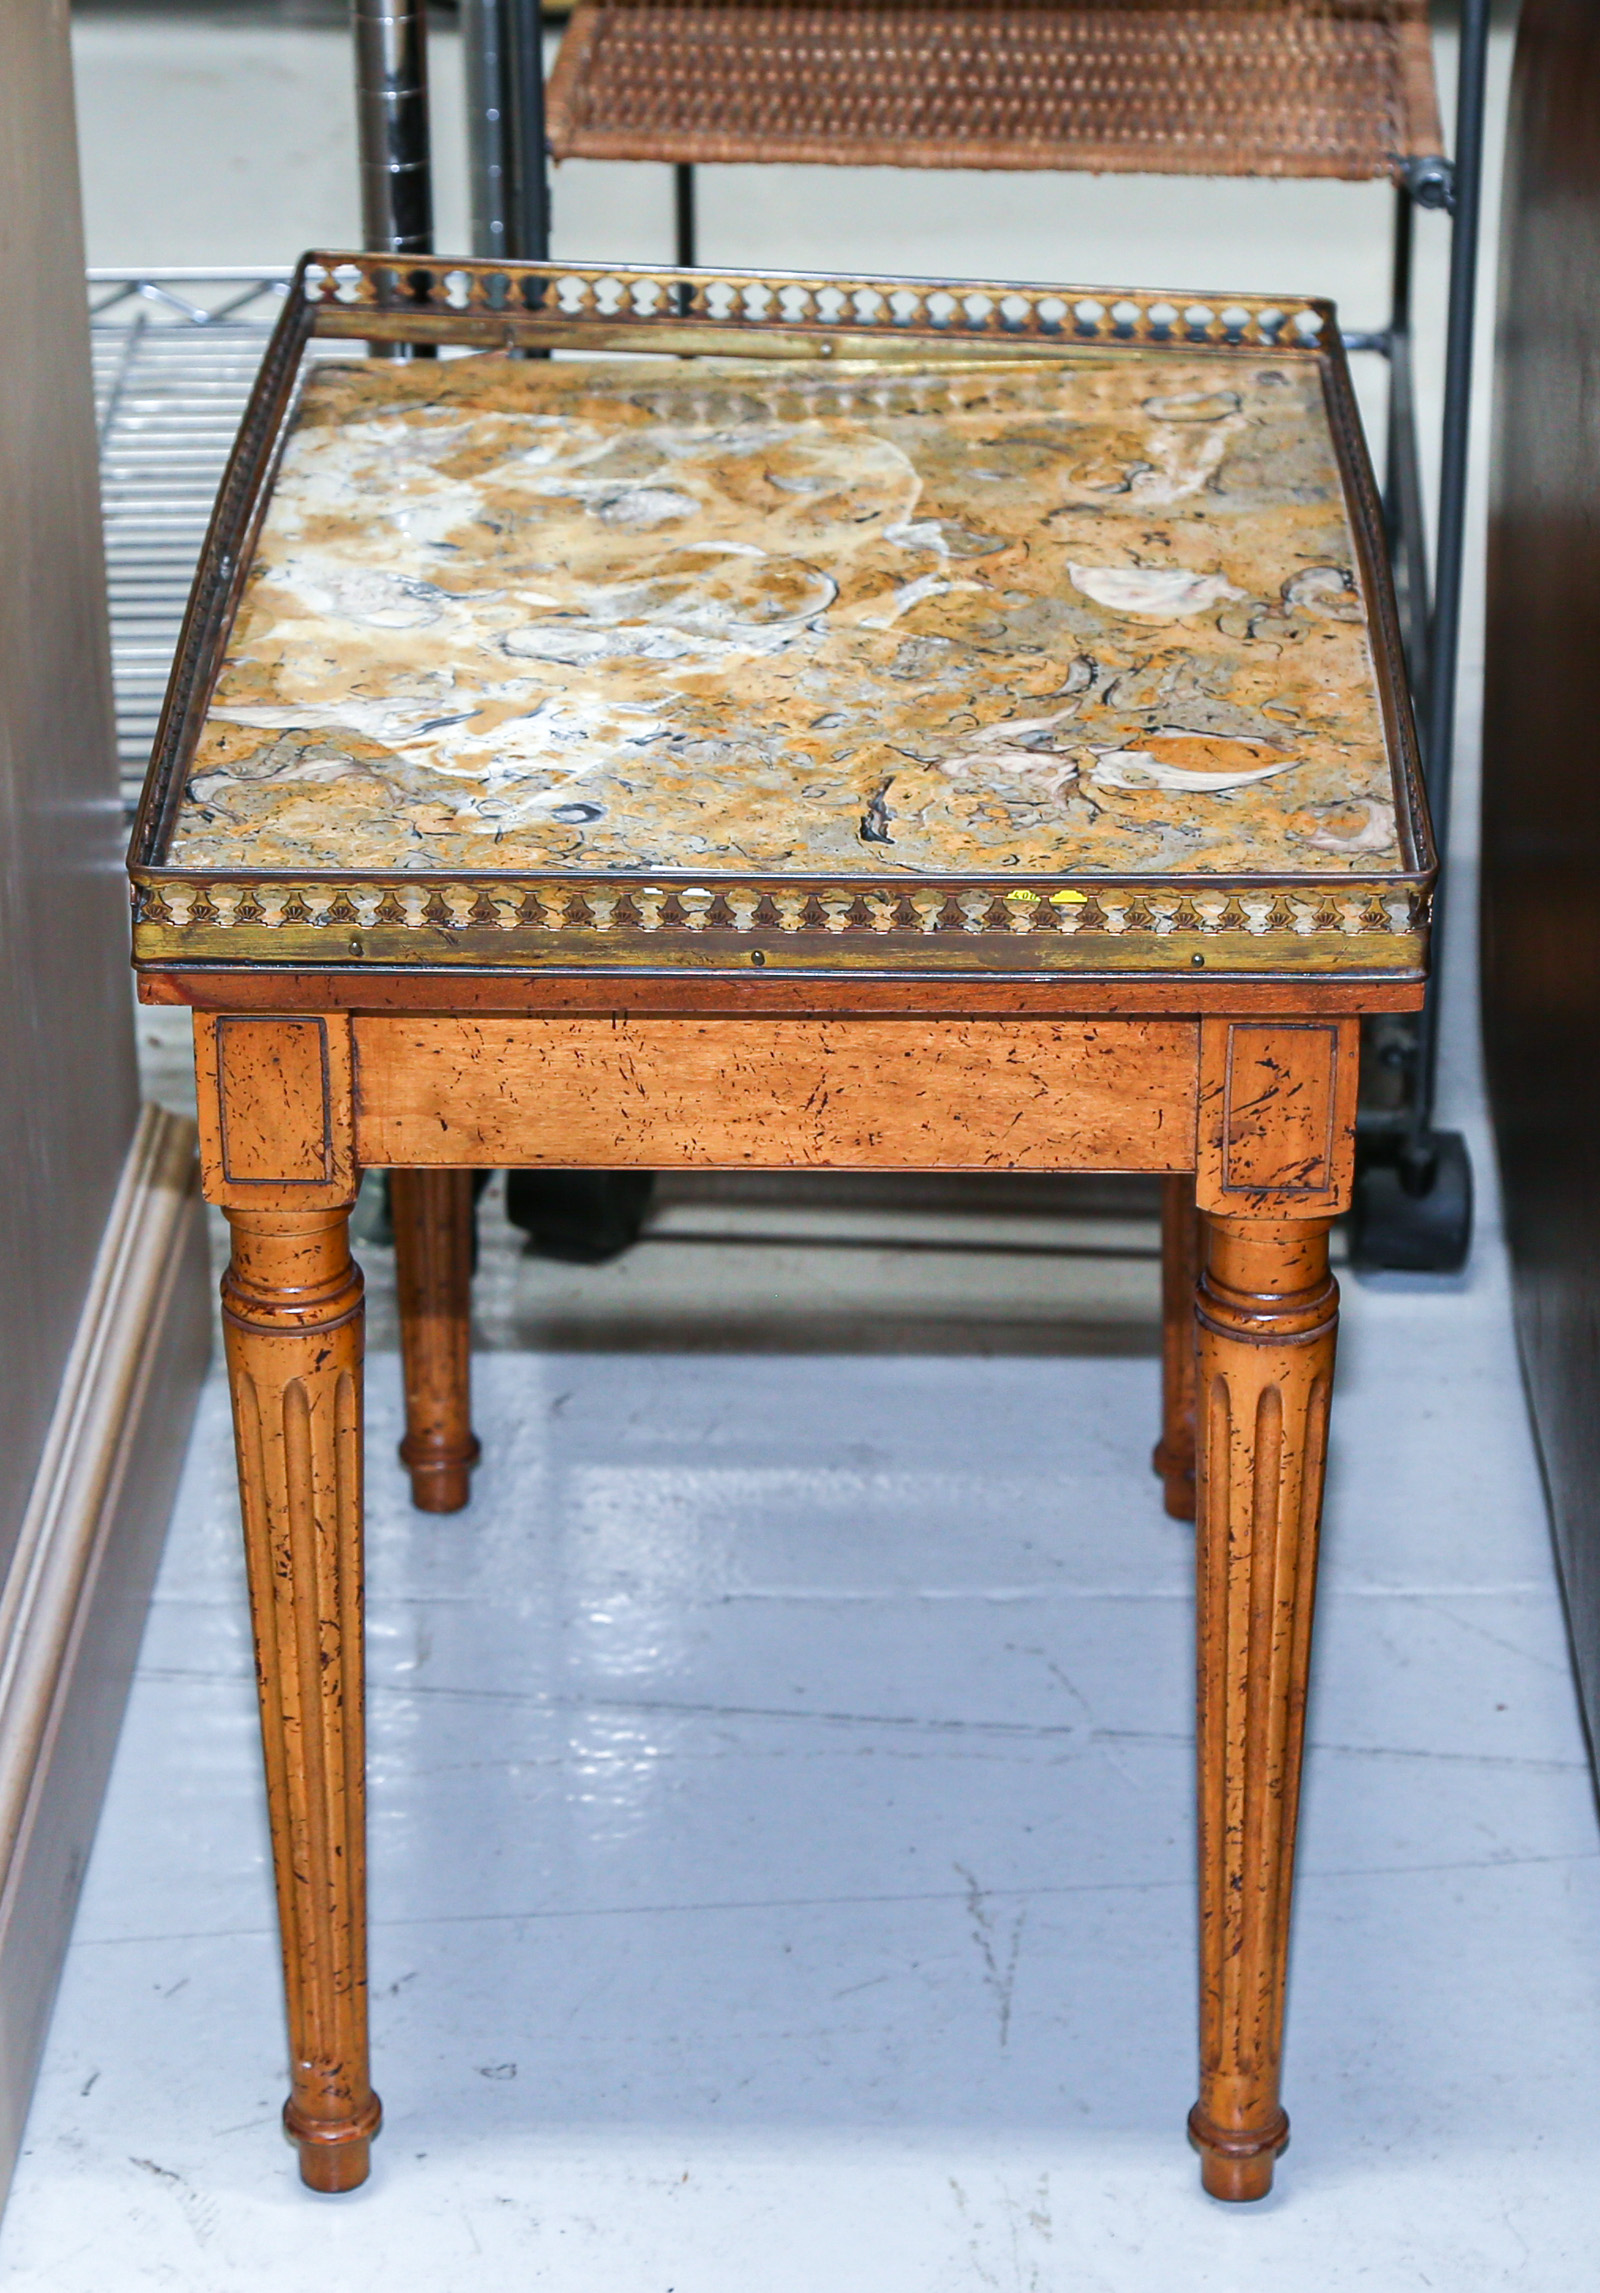 WALNUT OCCASIONAL TABLE WITH MARBLE 2e8b65